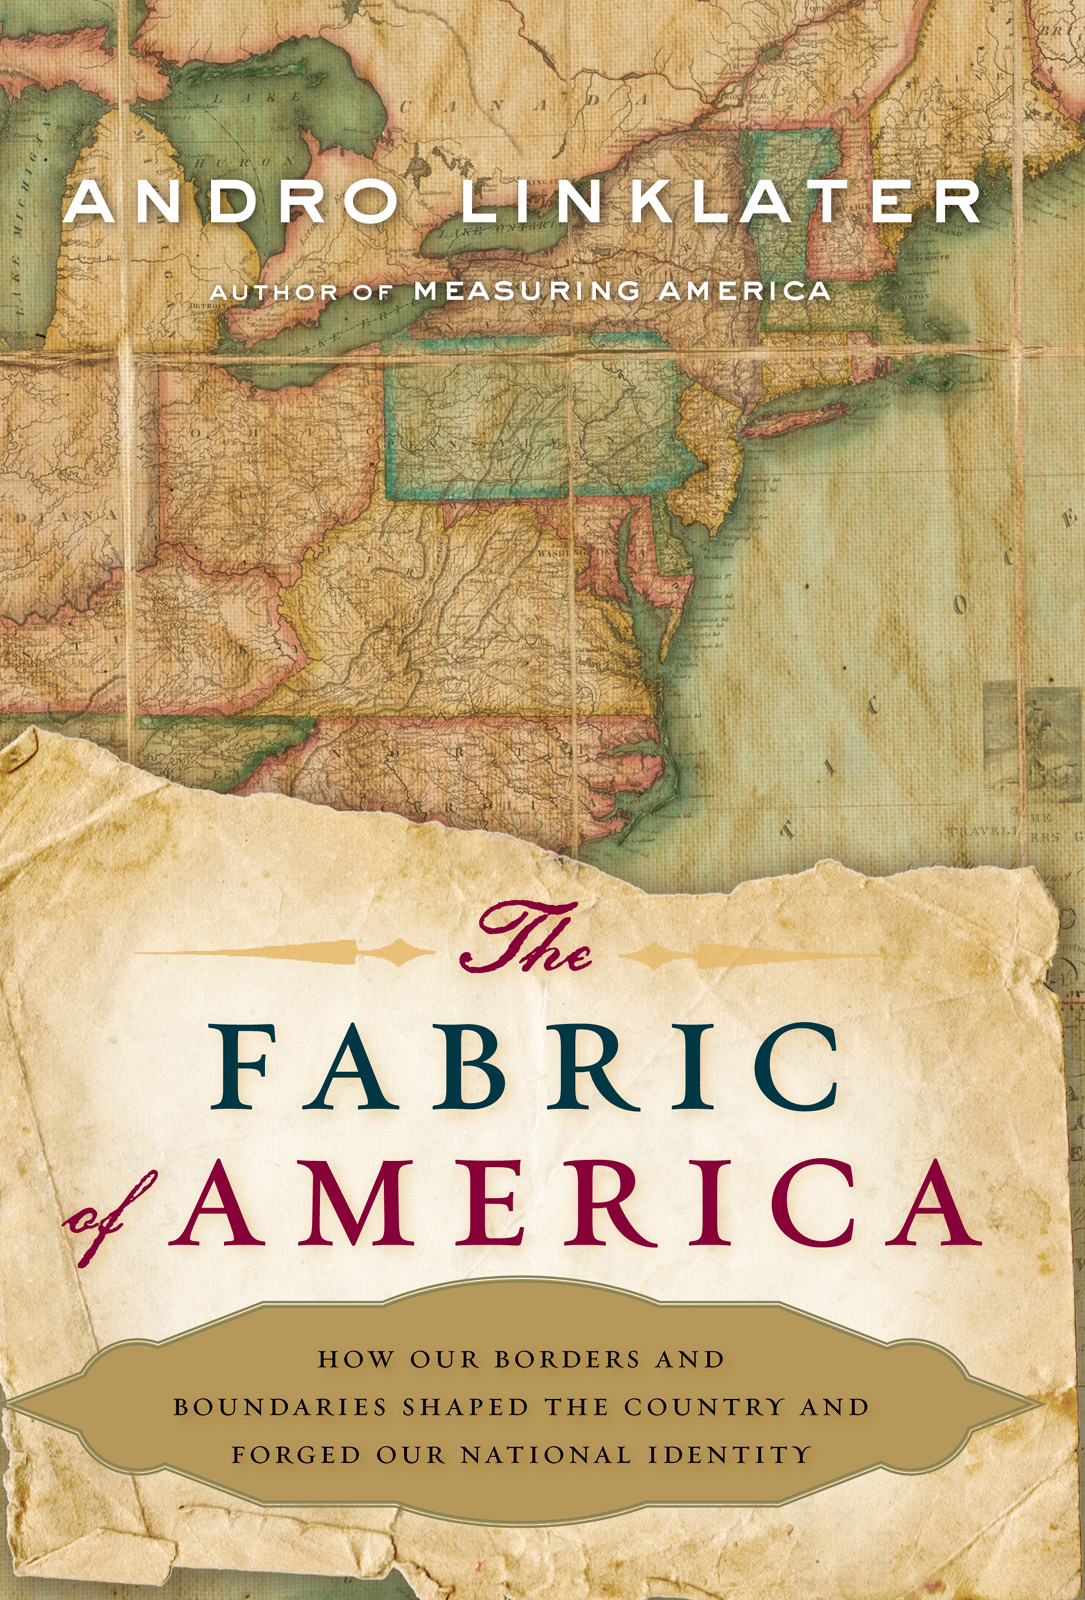 The Fabric of America (2007) by Andro Linklater